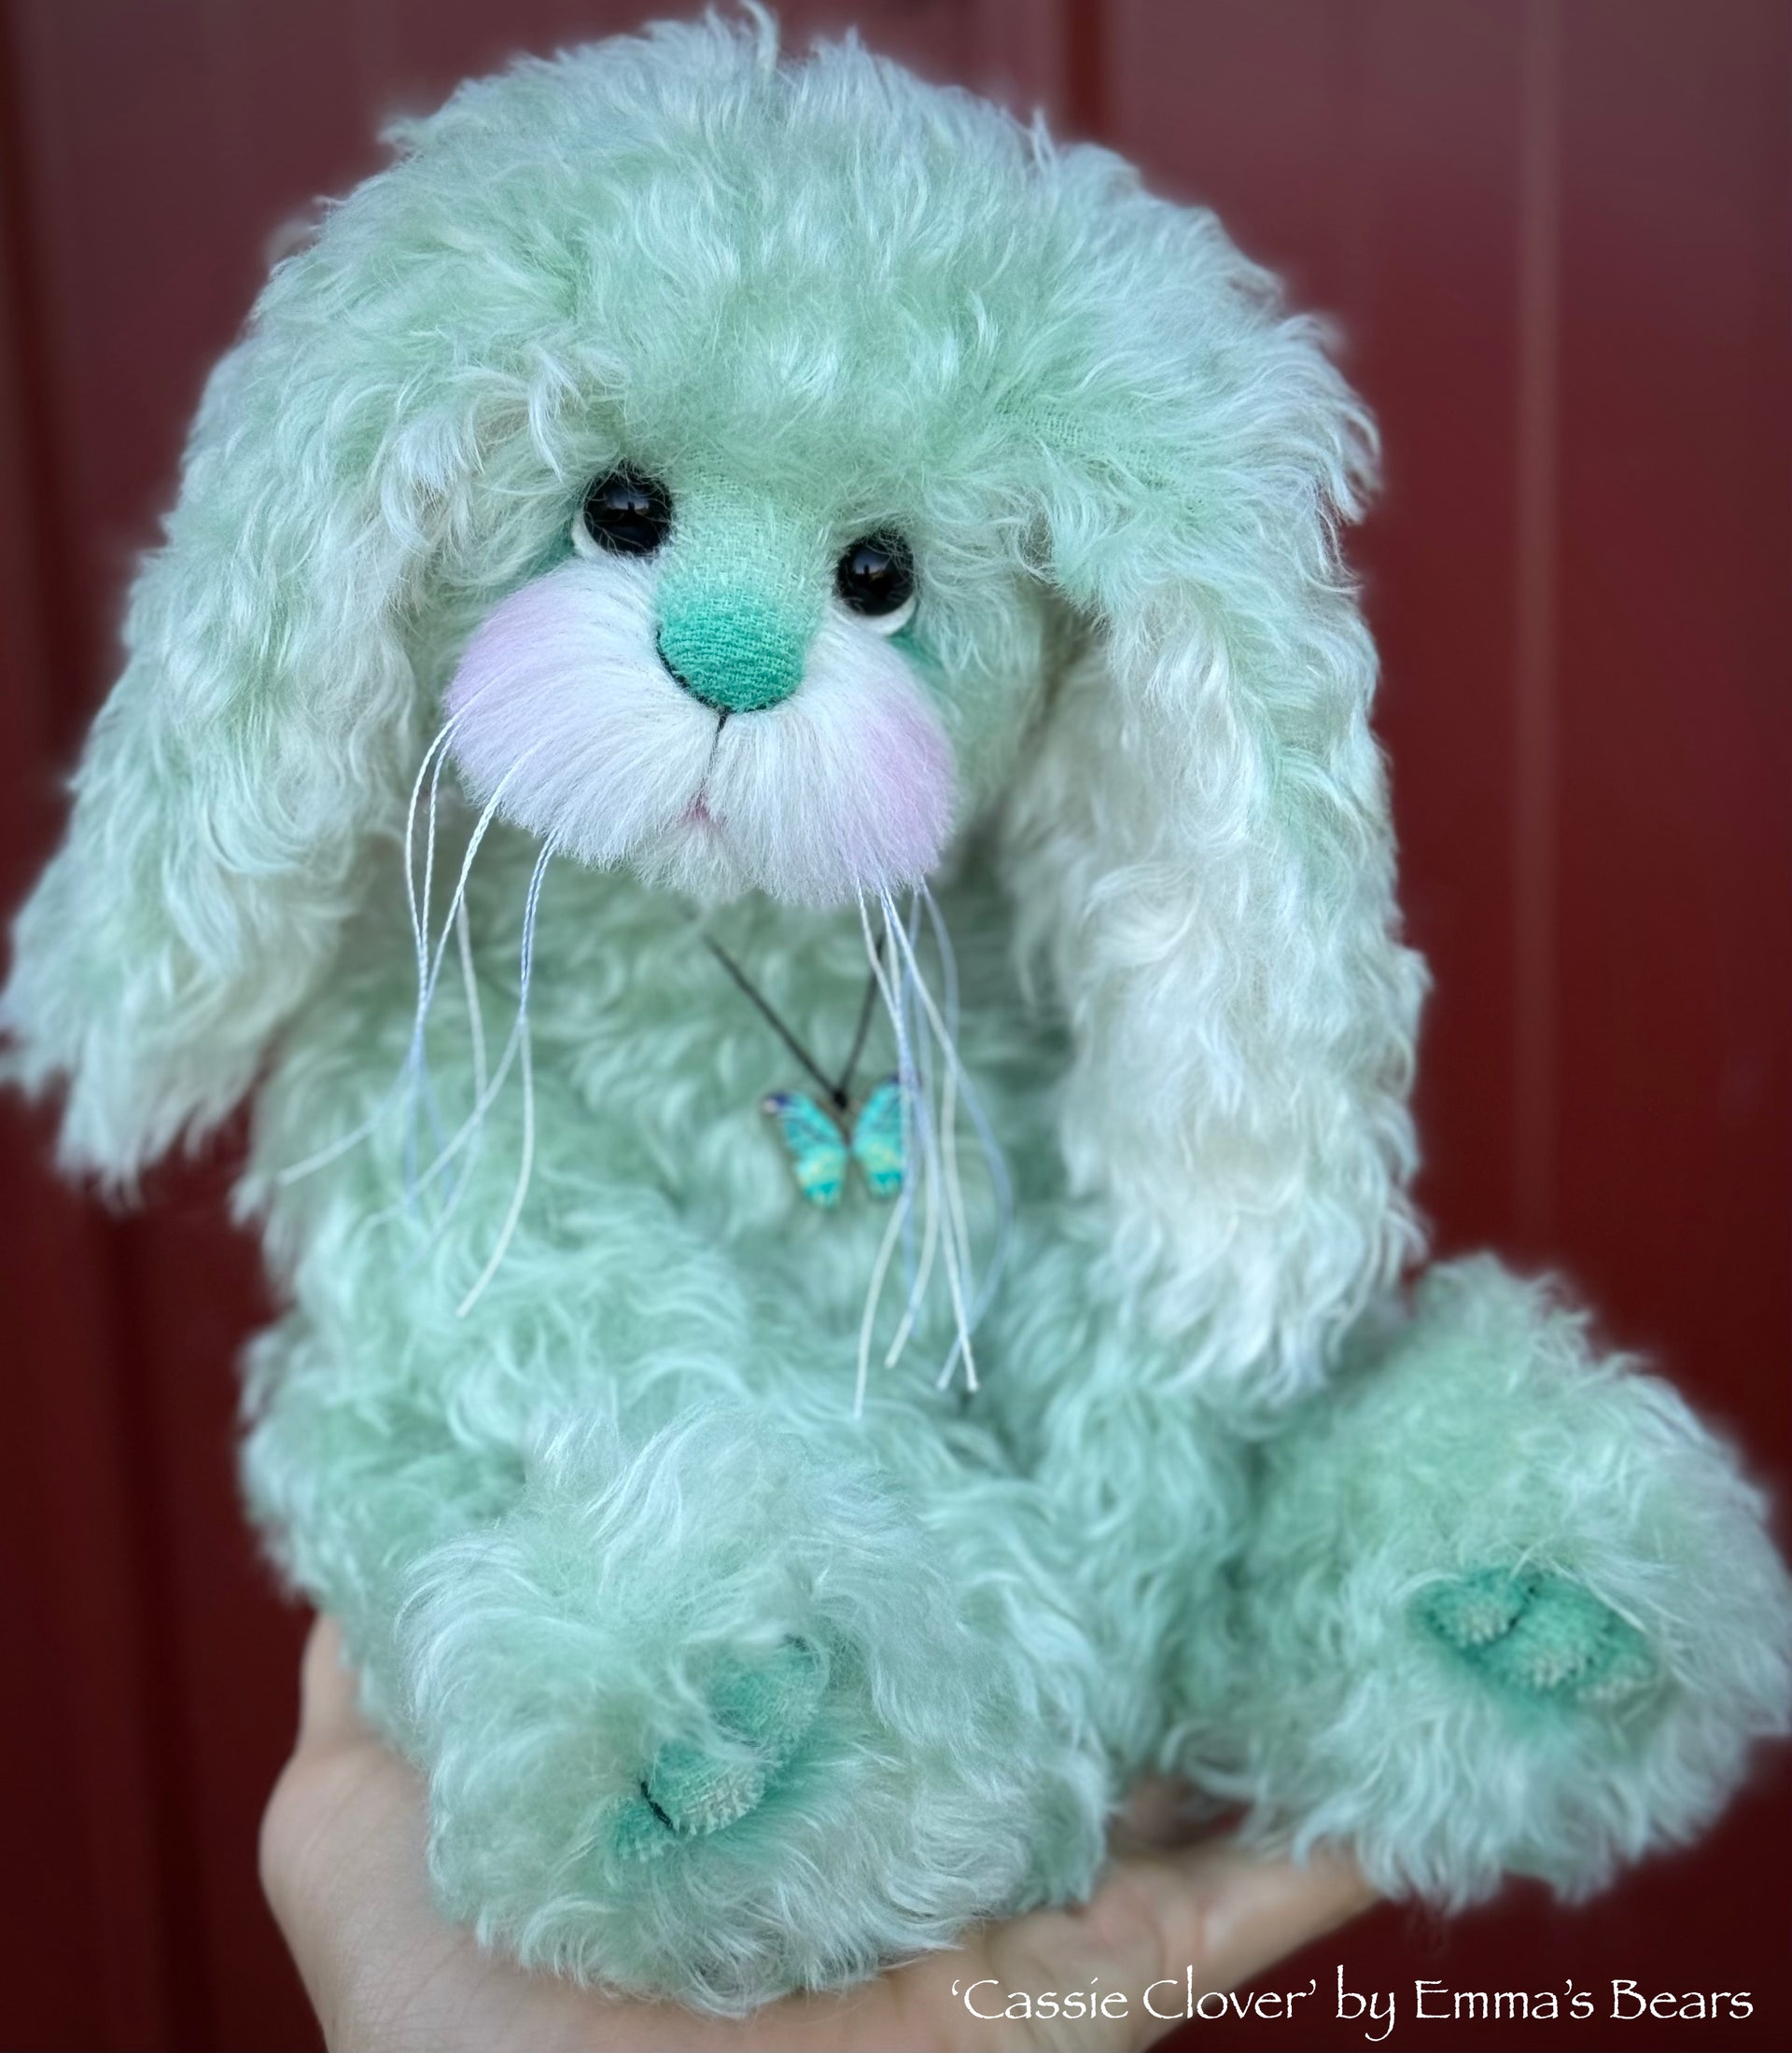 Cassie Clover - 12" Hand-Dyed Kid Mohair EASTER Bunny by Emma's Bears - OOAK